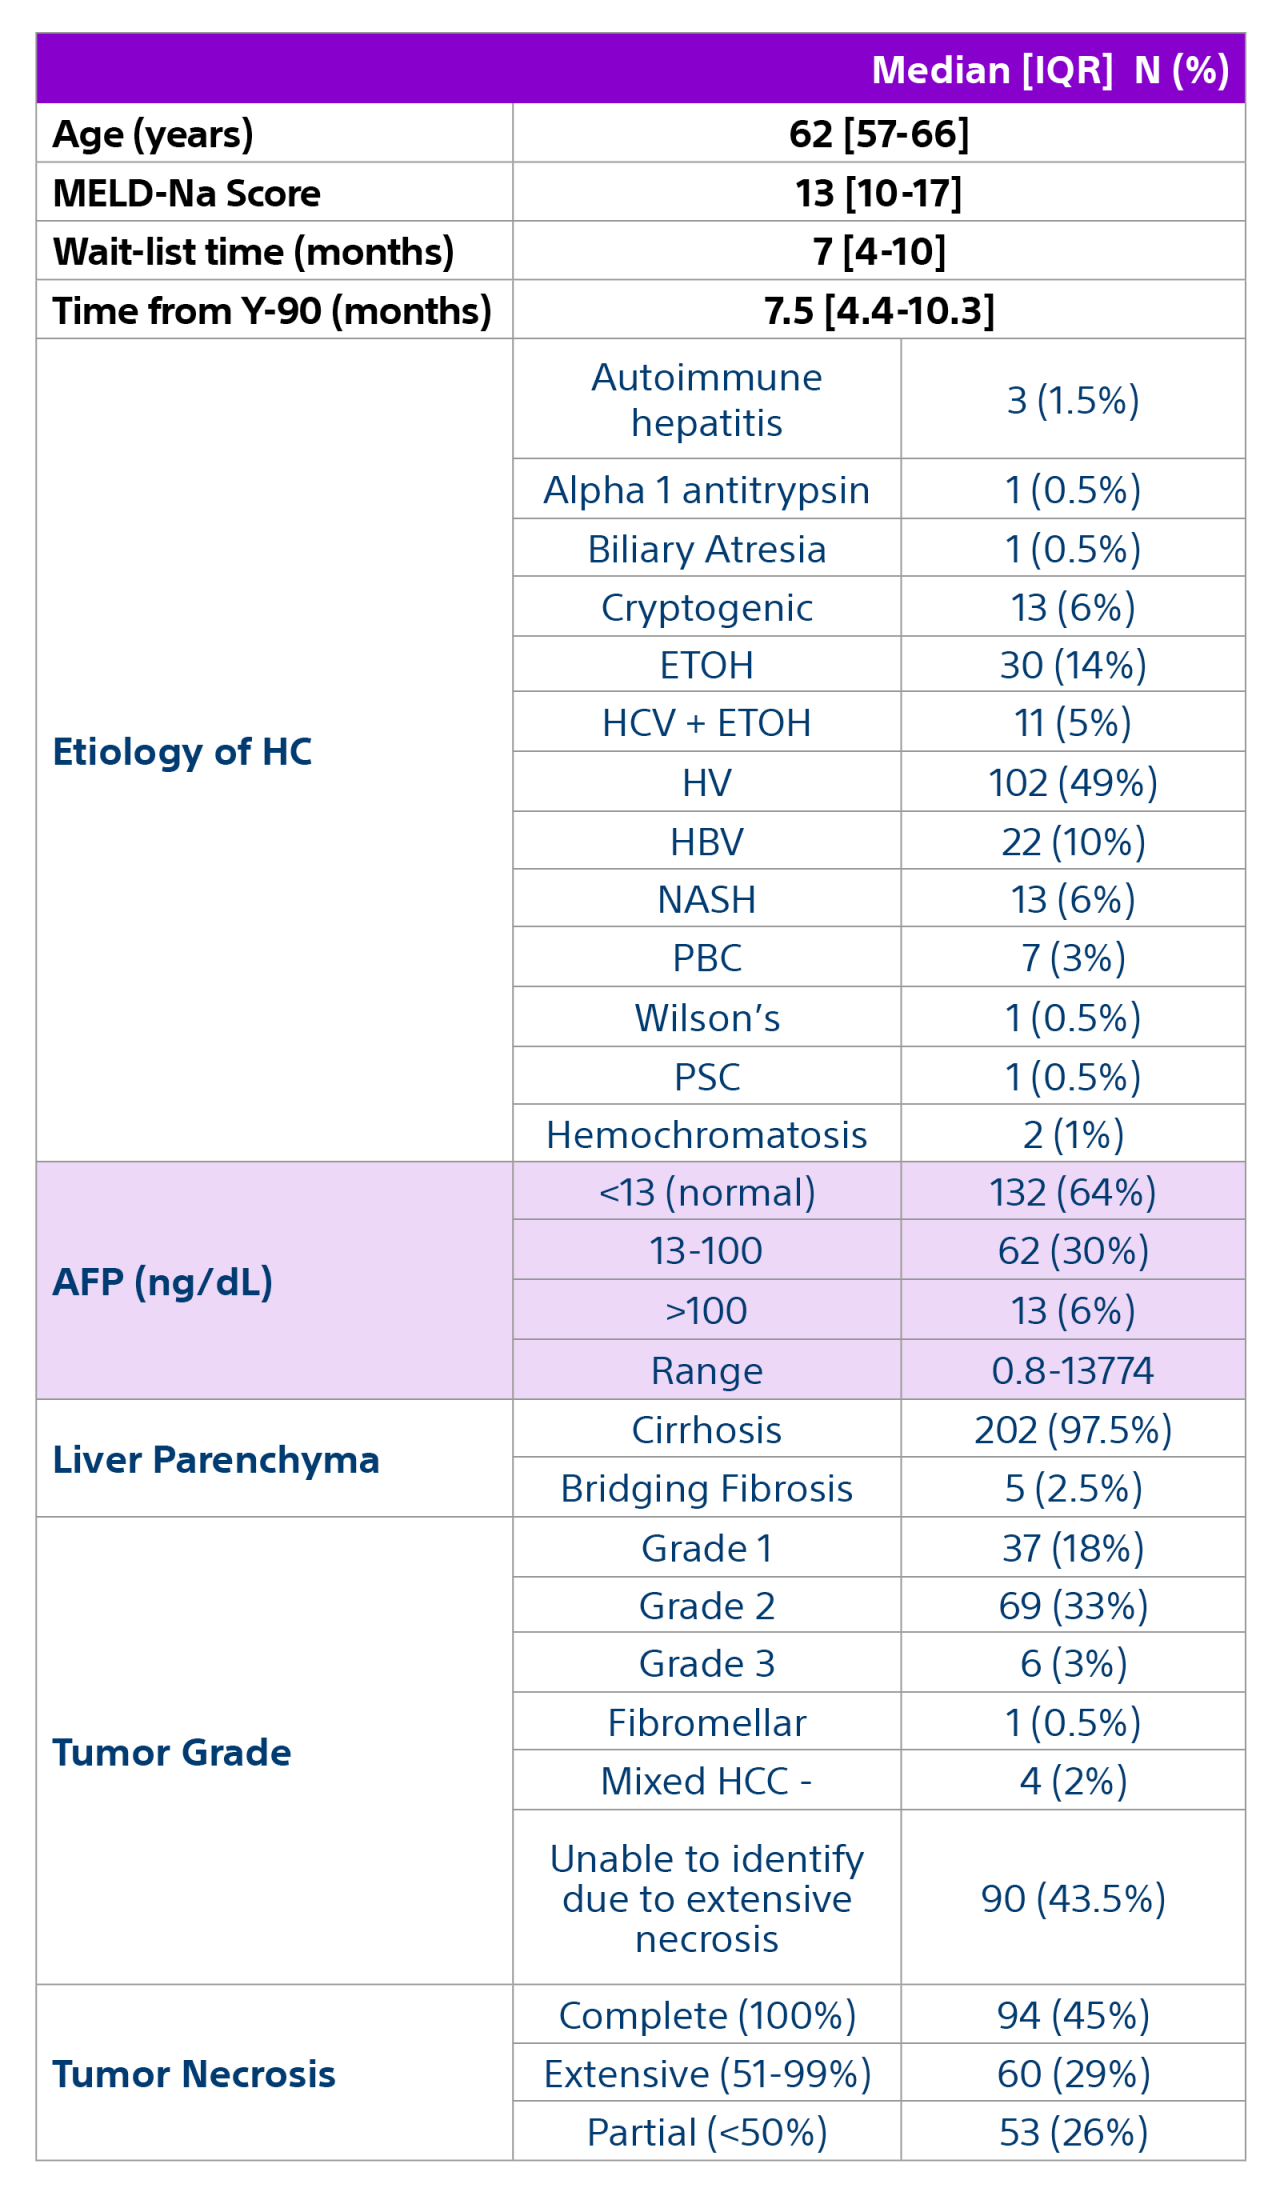 Chart showing age 62 (57-66), Meld-Na Score, Wait-list Time (months), Time from Y-90 (months) and Etiology of HC, AFP (ng/dL), Liver Parenchyma, Tumor Grade, Tumor Necrosis.